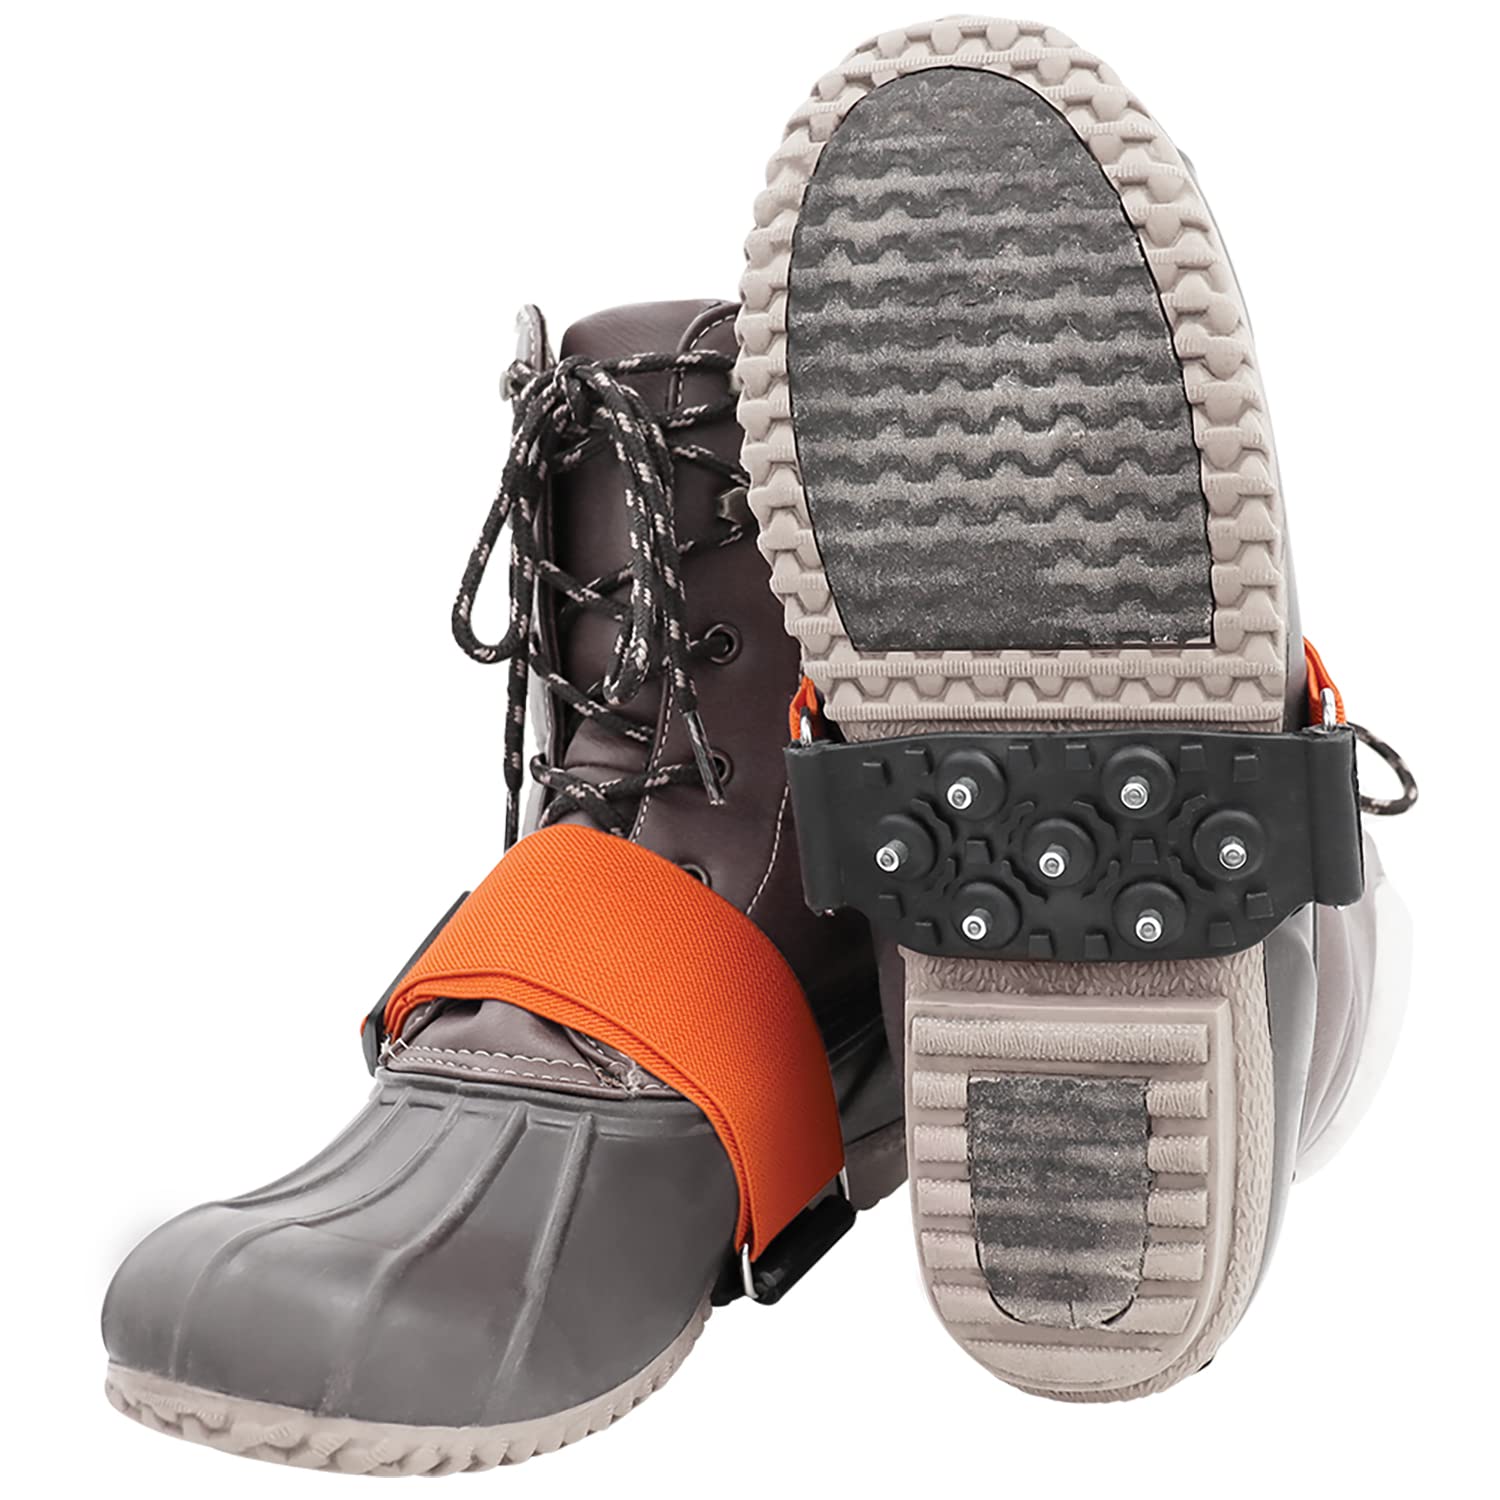 Ice Gripster Treads Nonslip Traction Cleats for Snow [...]